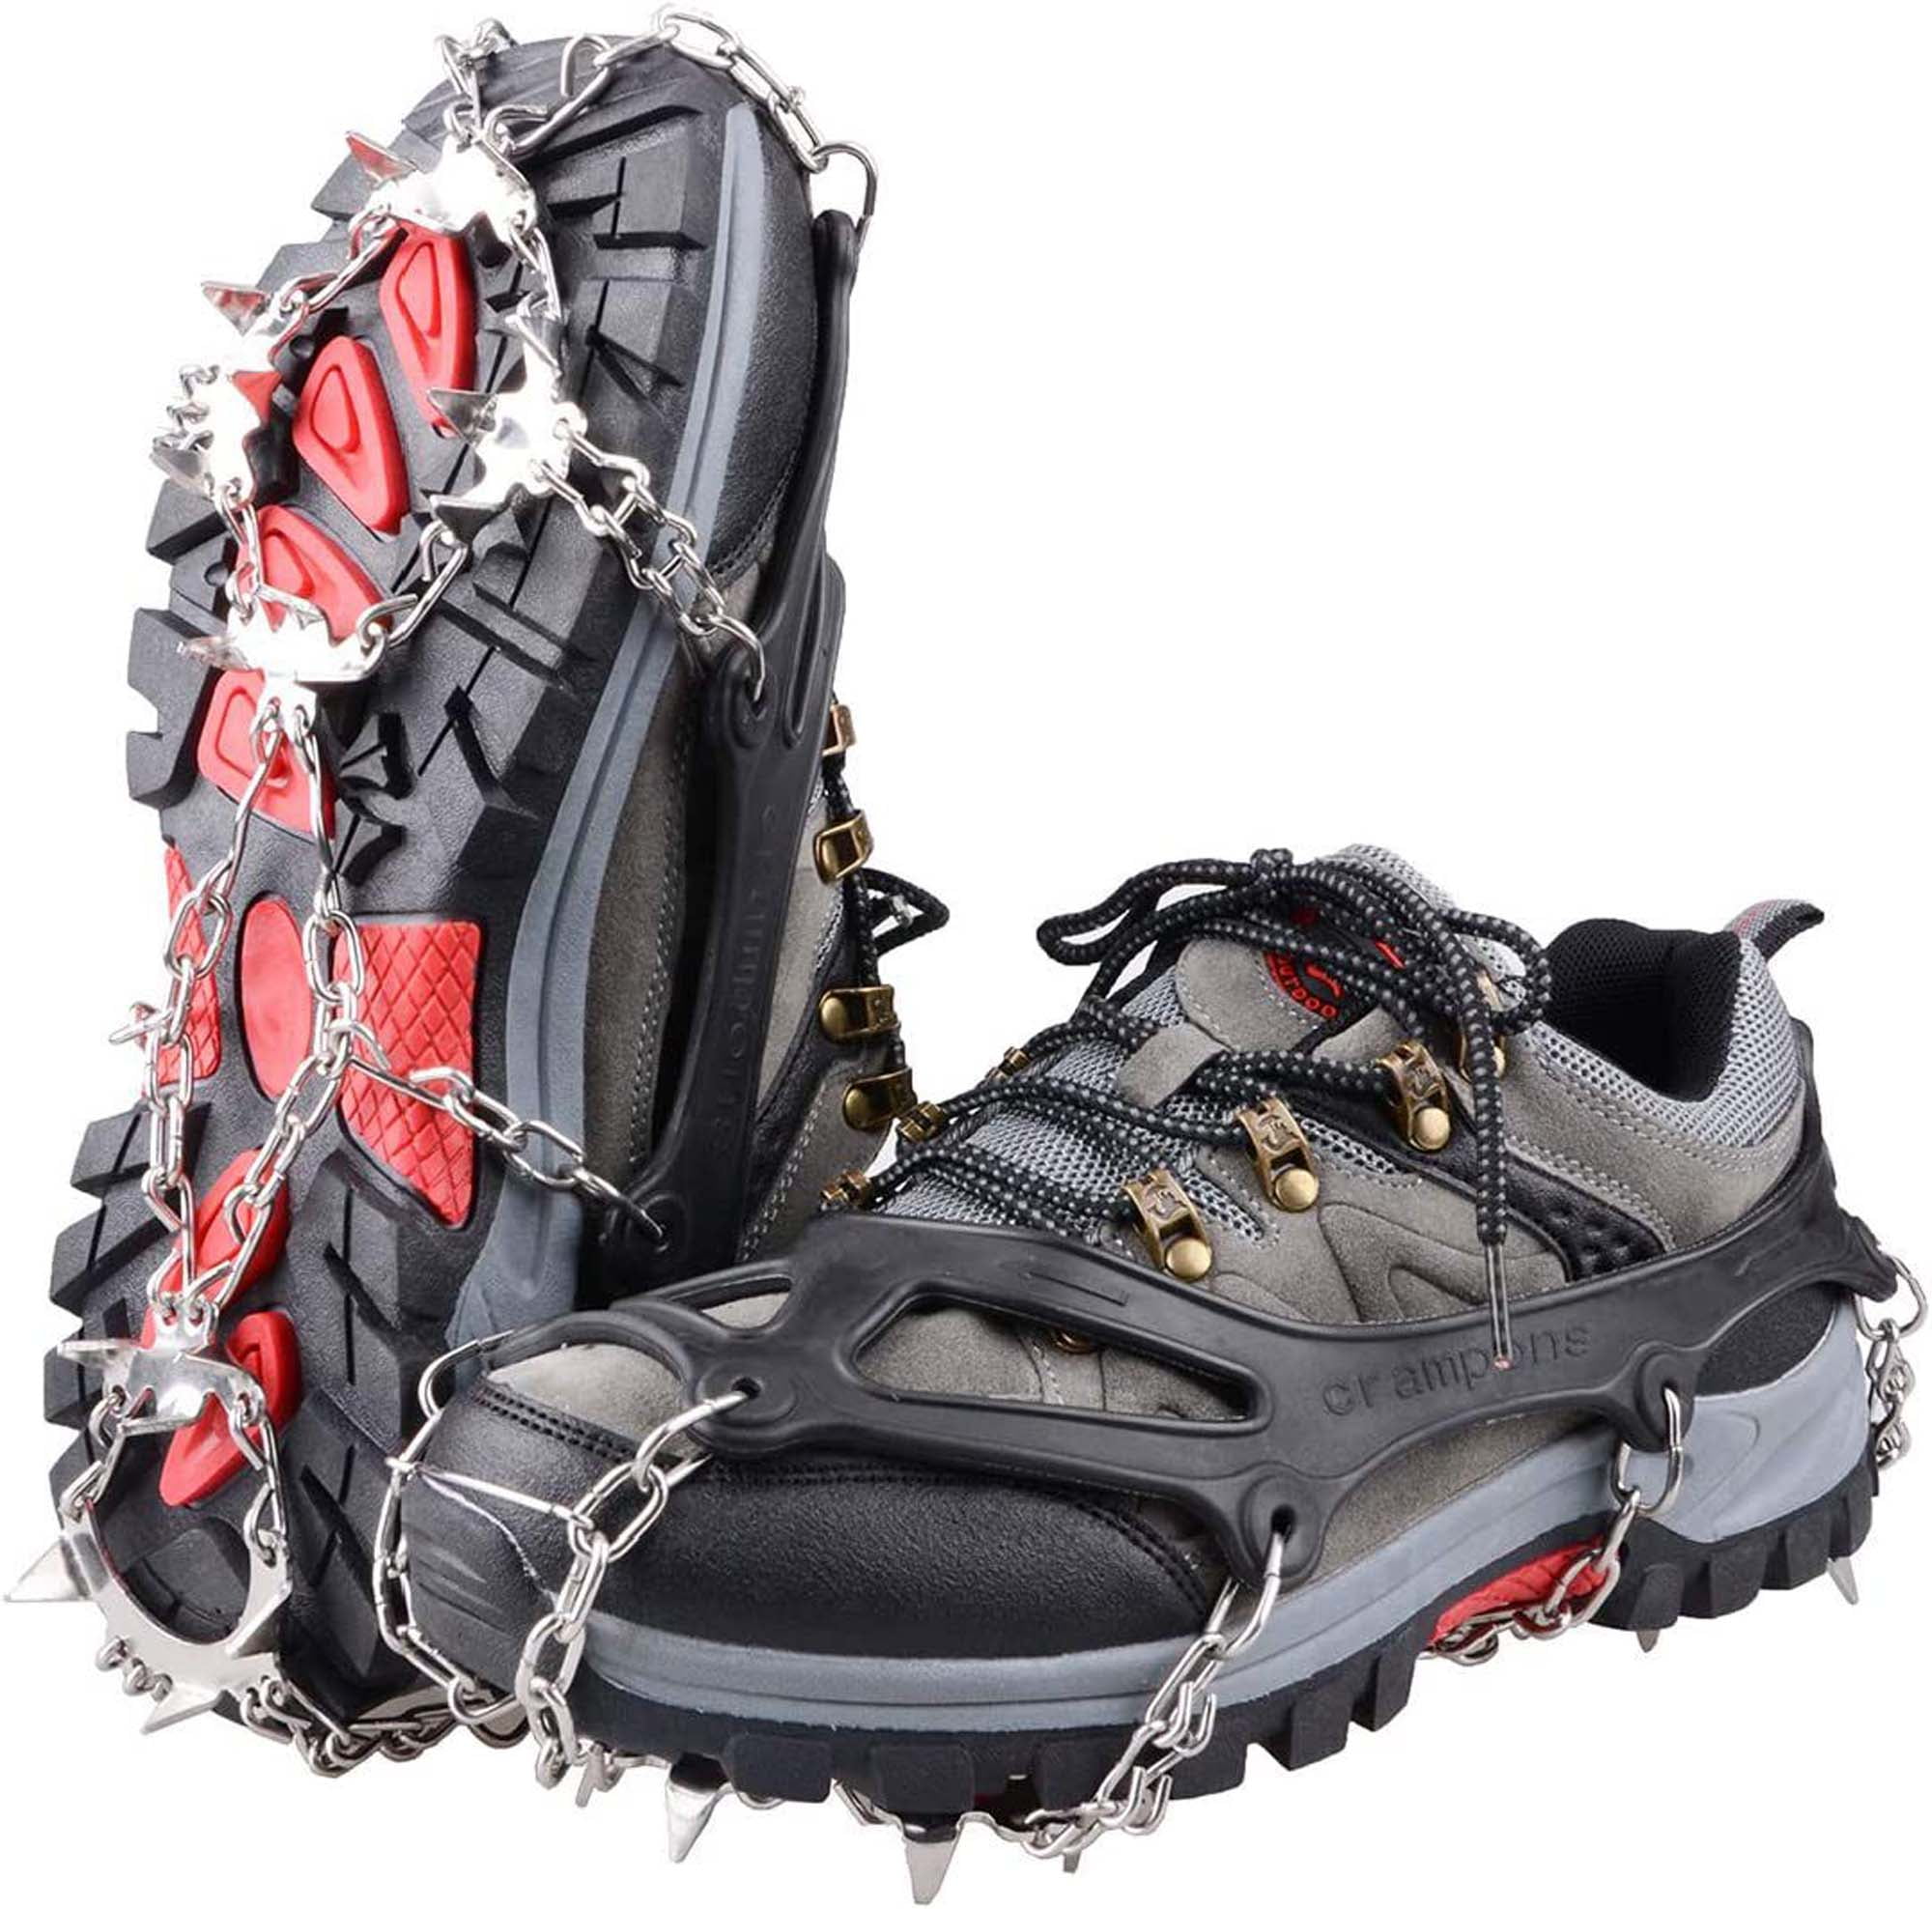 24 Spikes Ice Cleats Snows Crampons Walk Traction Cleats for Boots